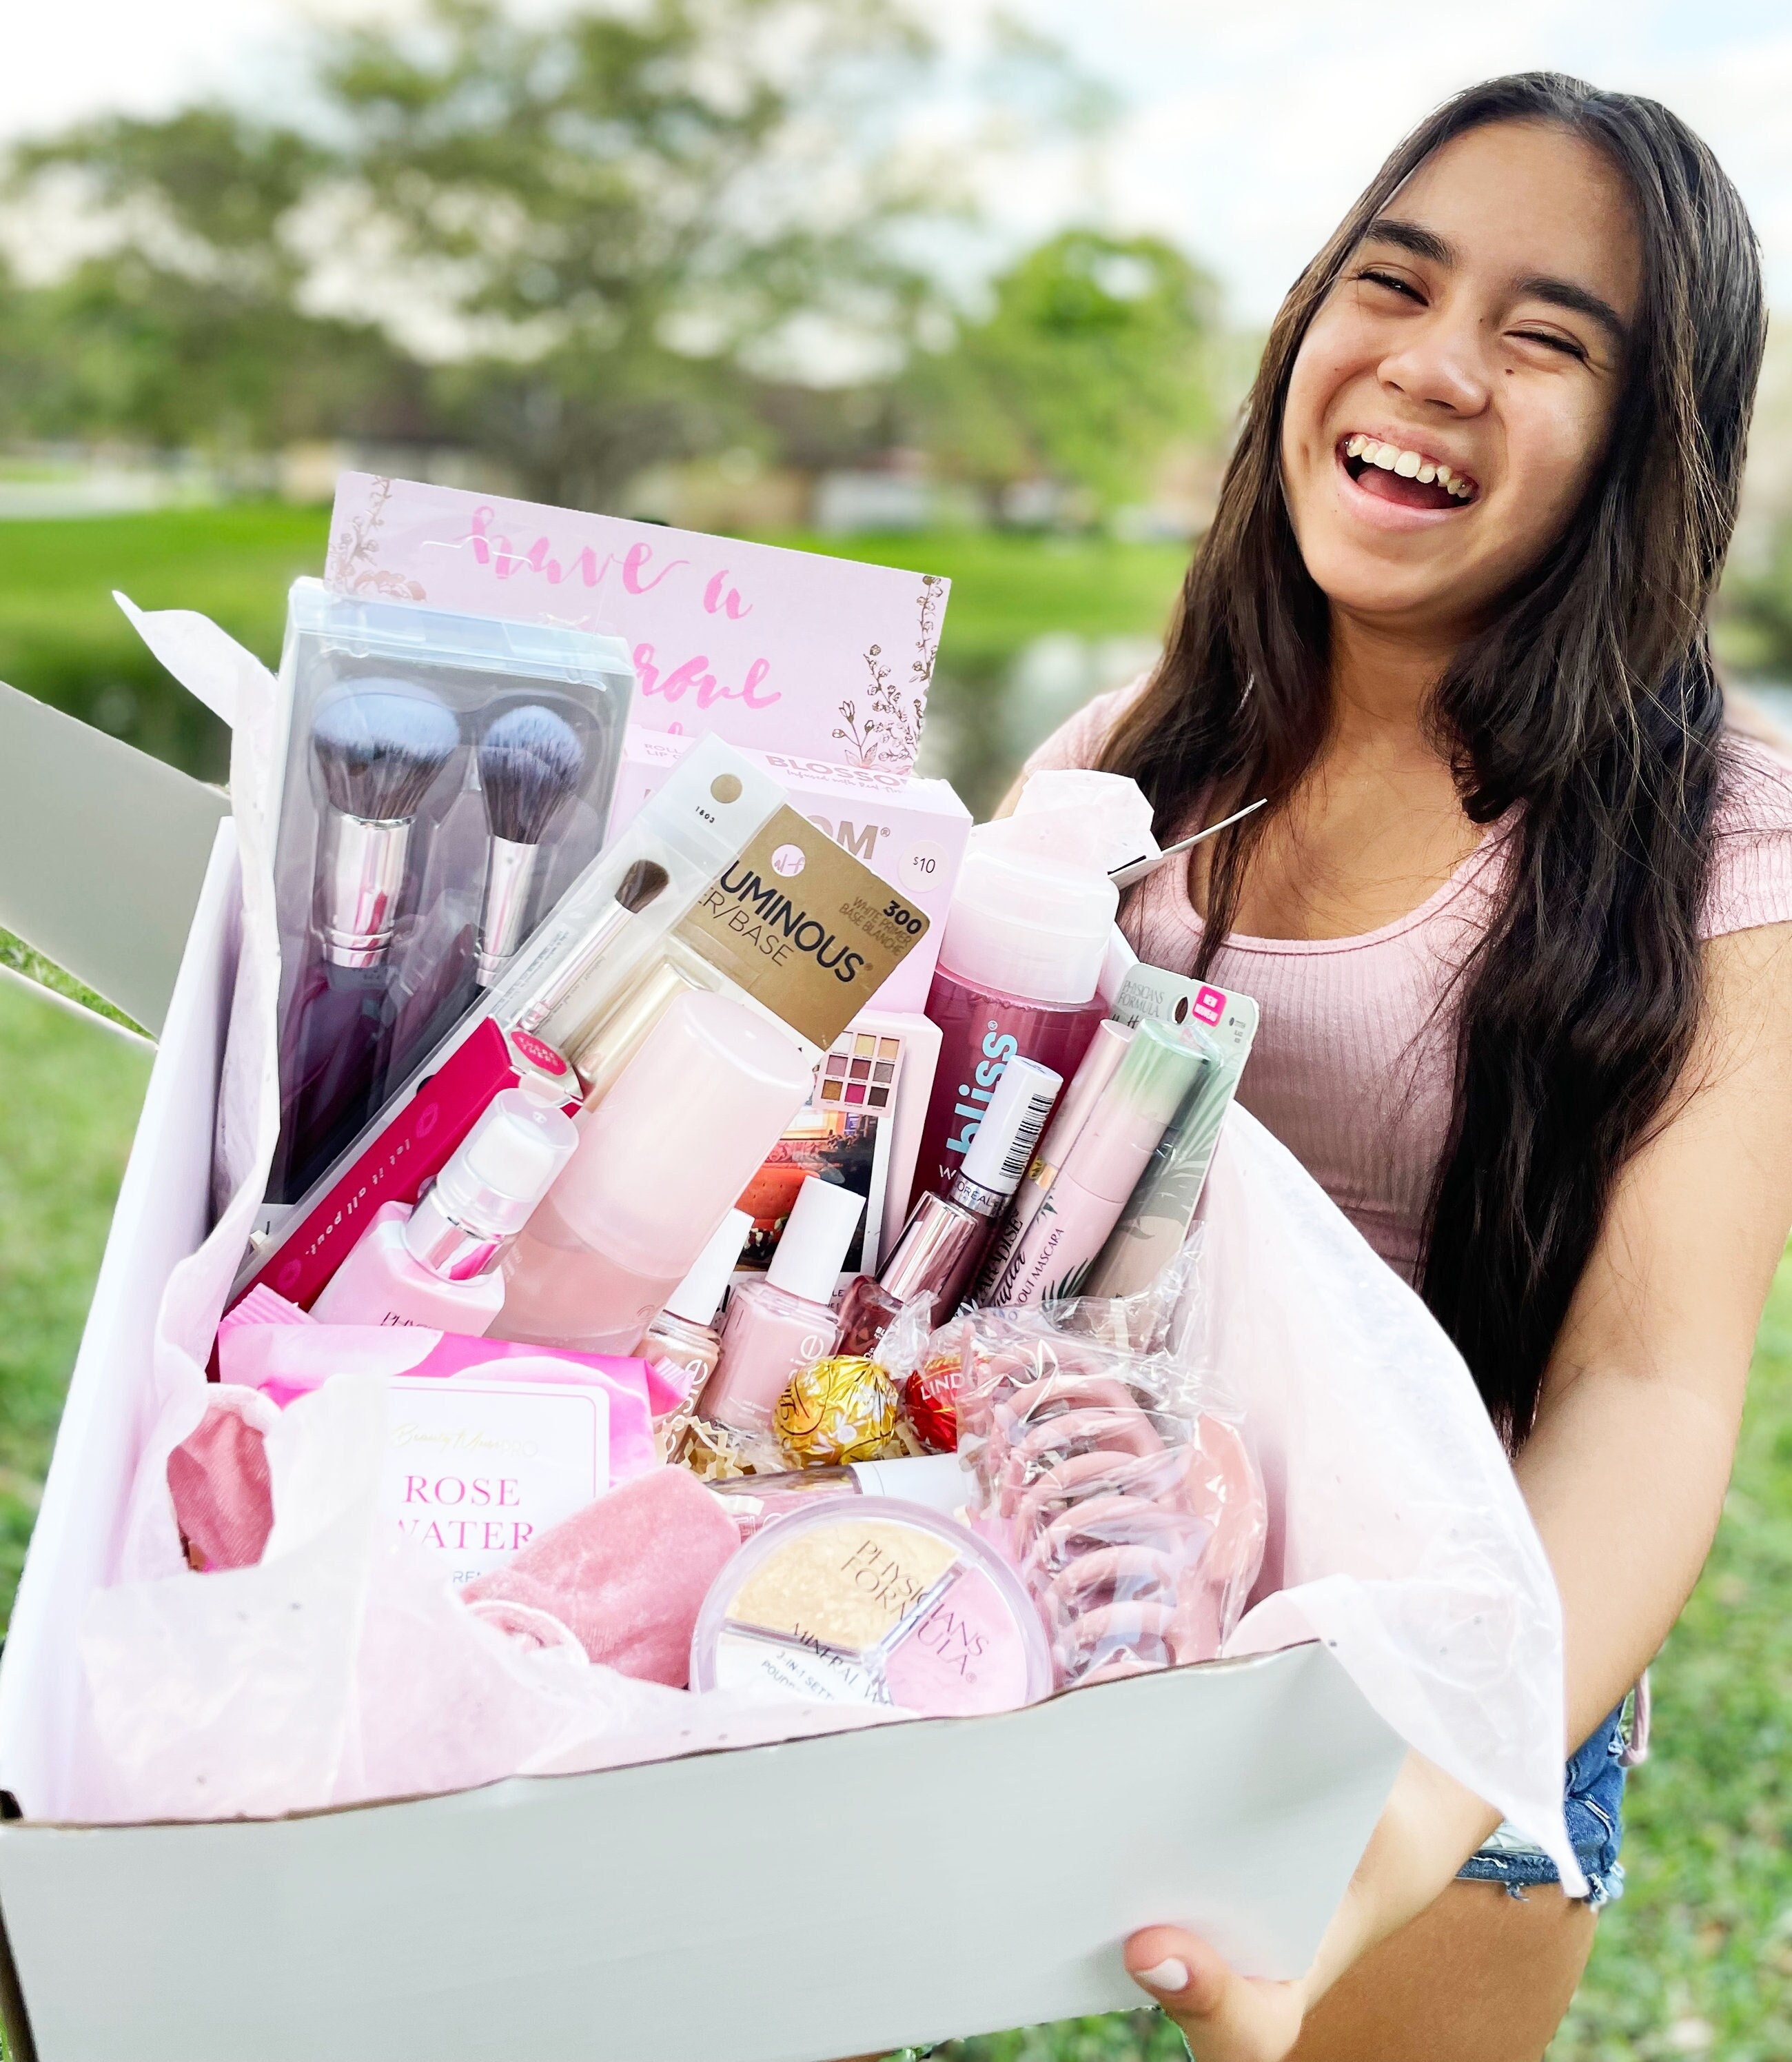 Gifts for Teen Girls • The Pinning Mama